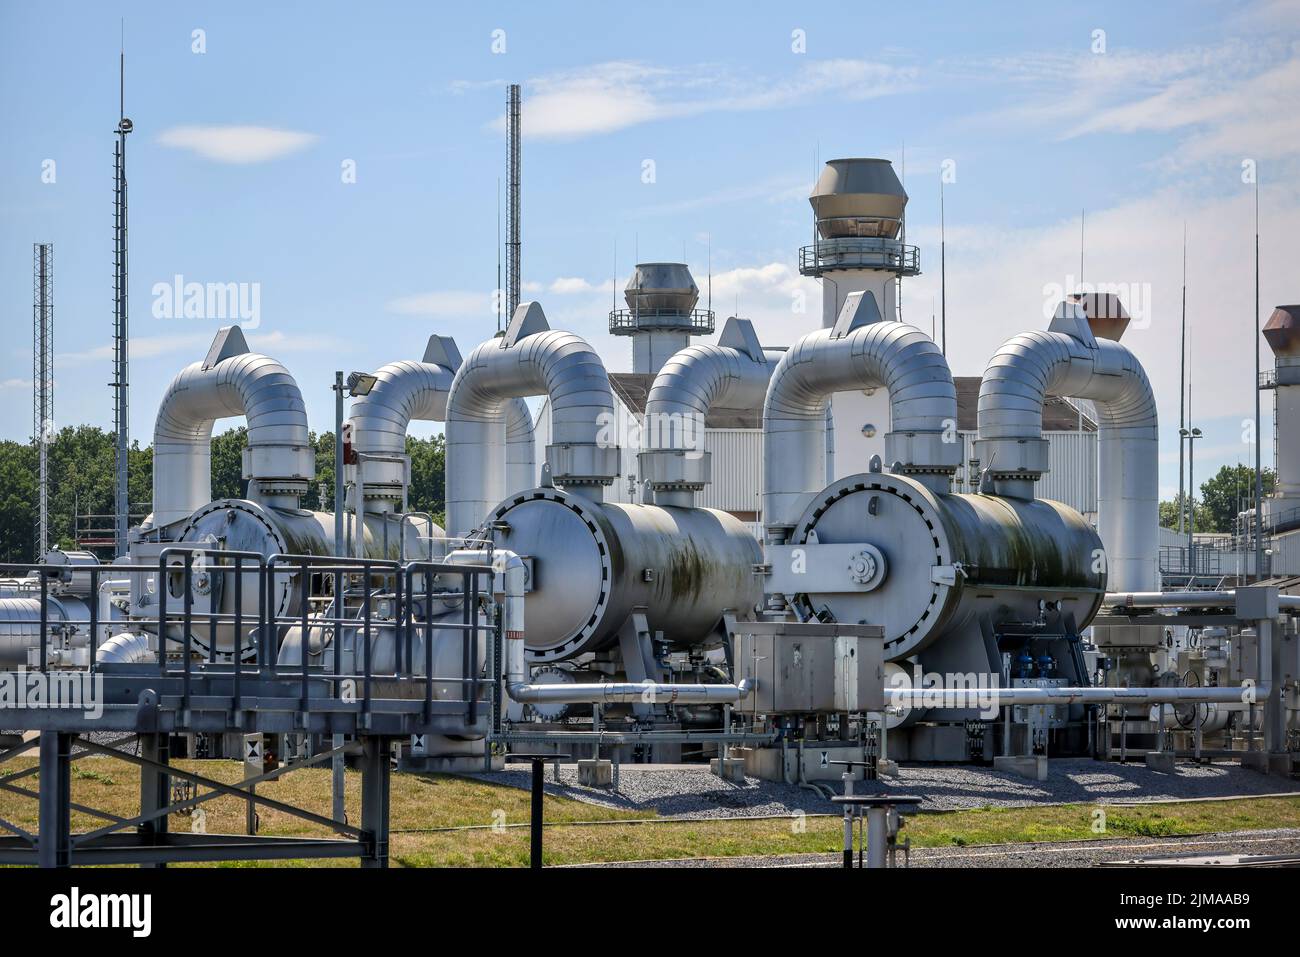 Werne, North Rhine-Westphalia, Germany - Compressor Stadium and Pumping Station for Natural Gas. Open Grid Europe, Werne Station. The OGE compressor s Stock Photo